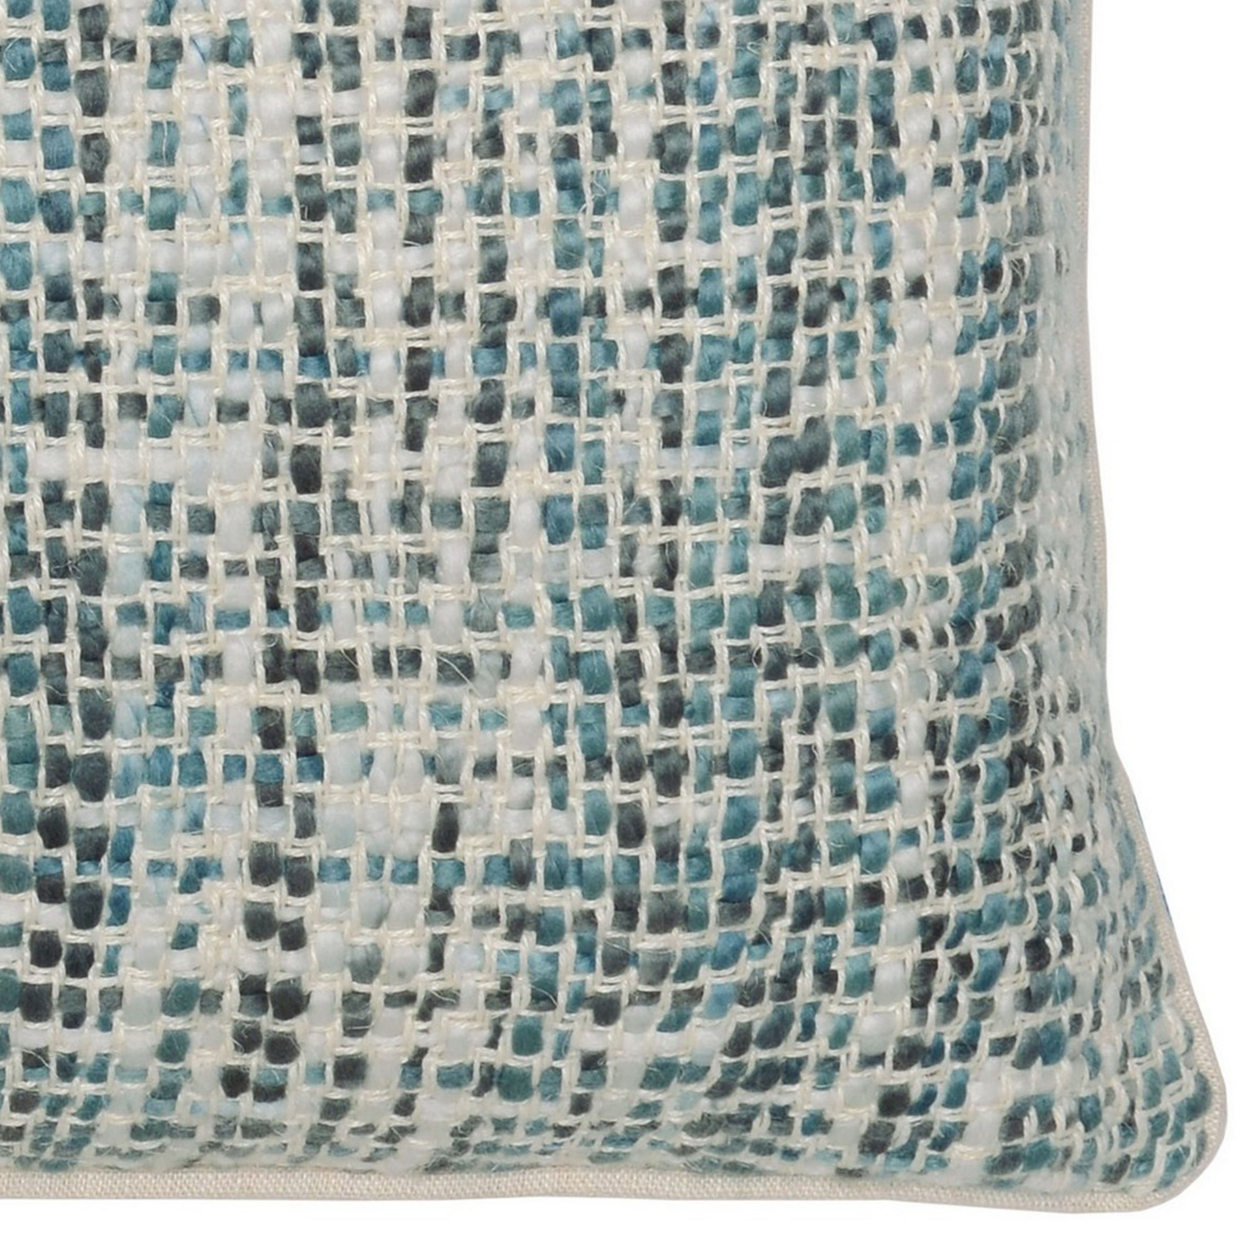 Square Fabric Throw Pillow With Hand Woven Pattern, White And Blue- Saltoro Sherpi